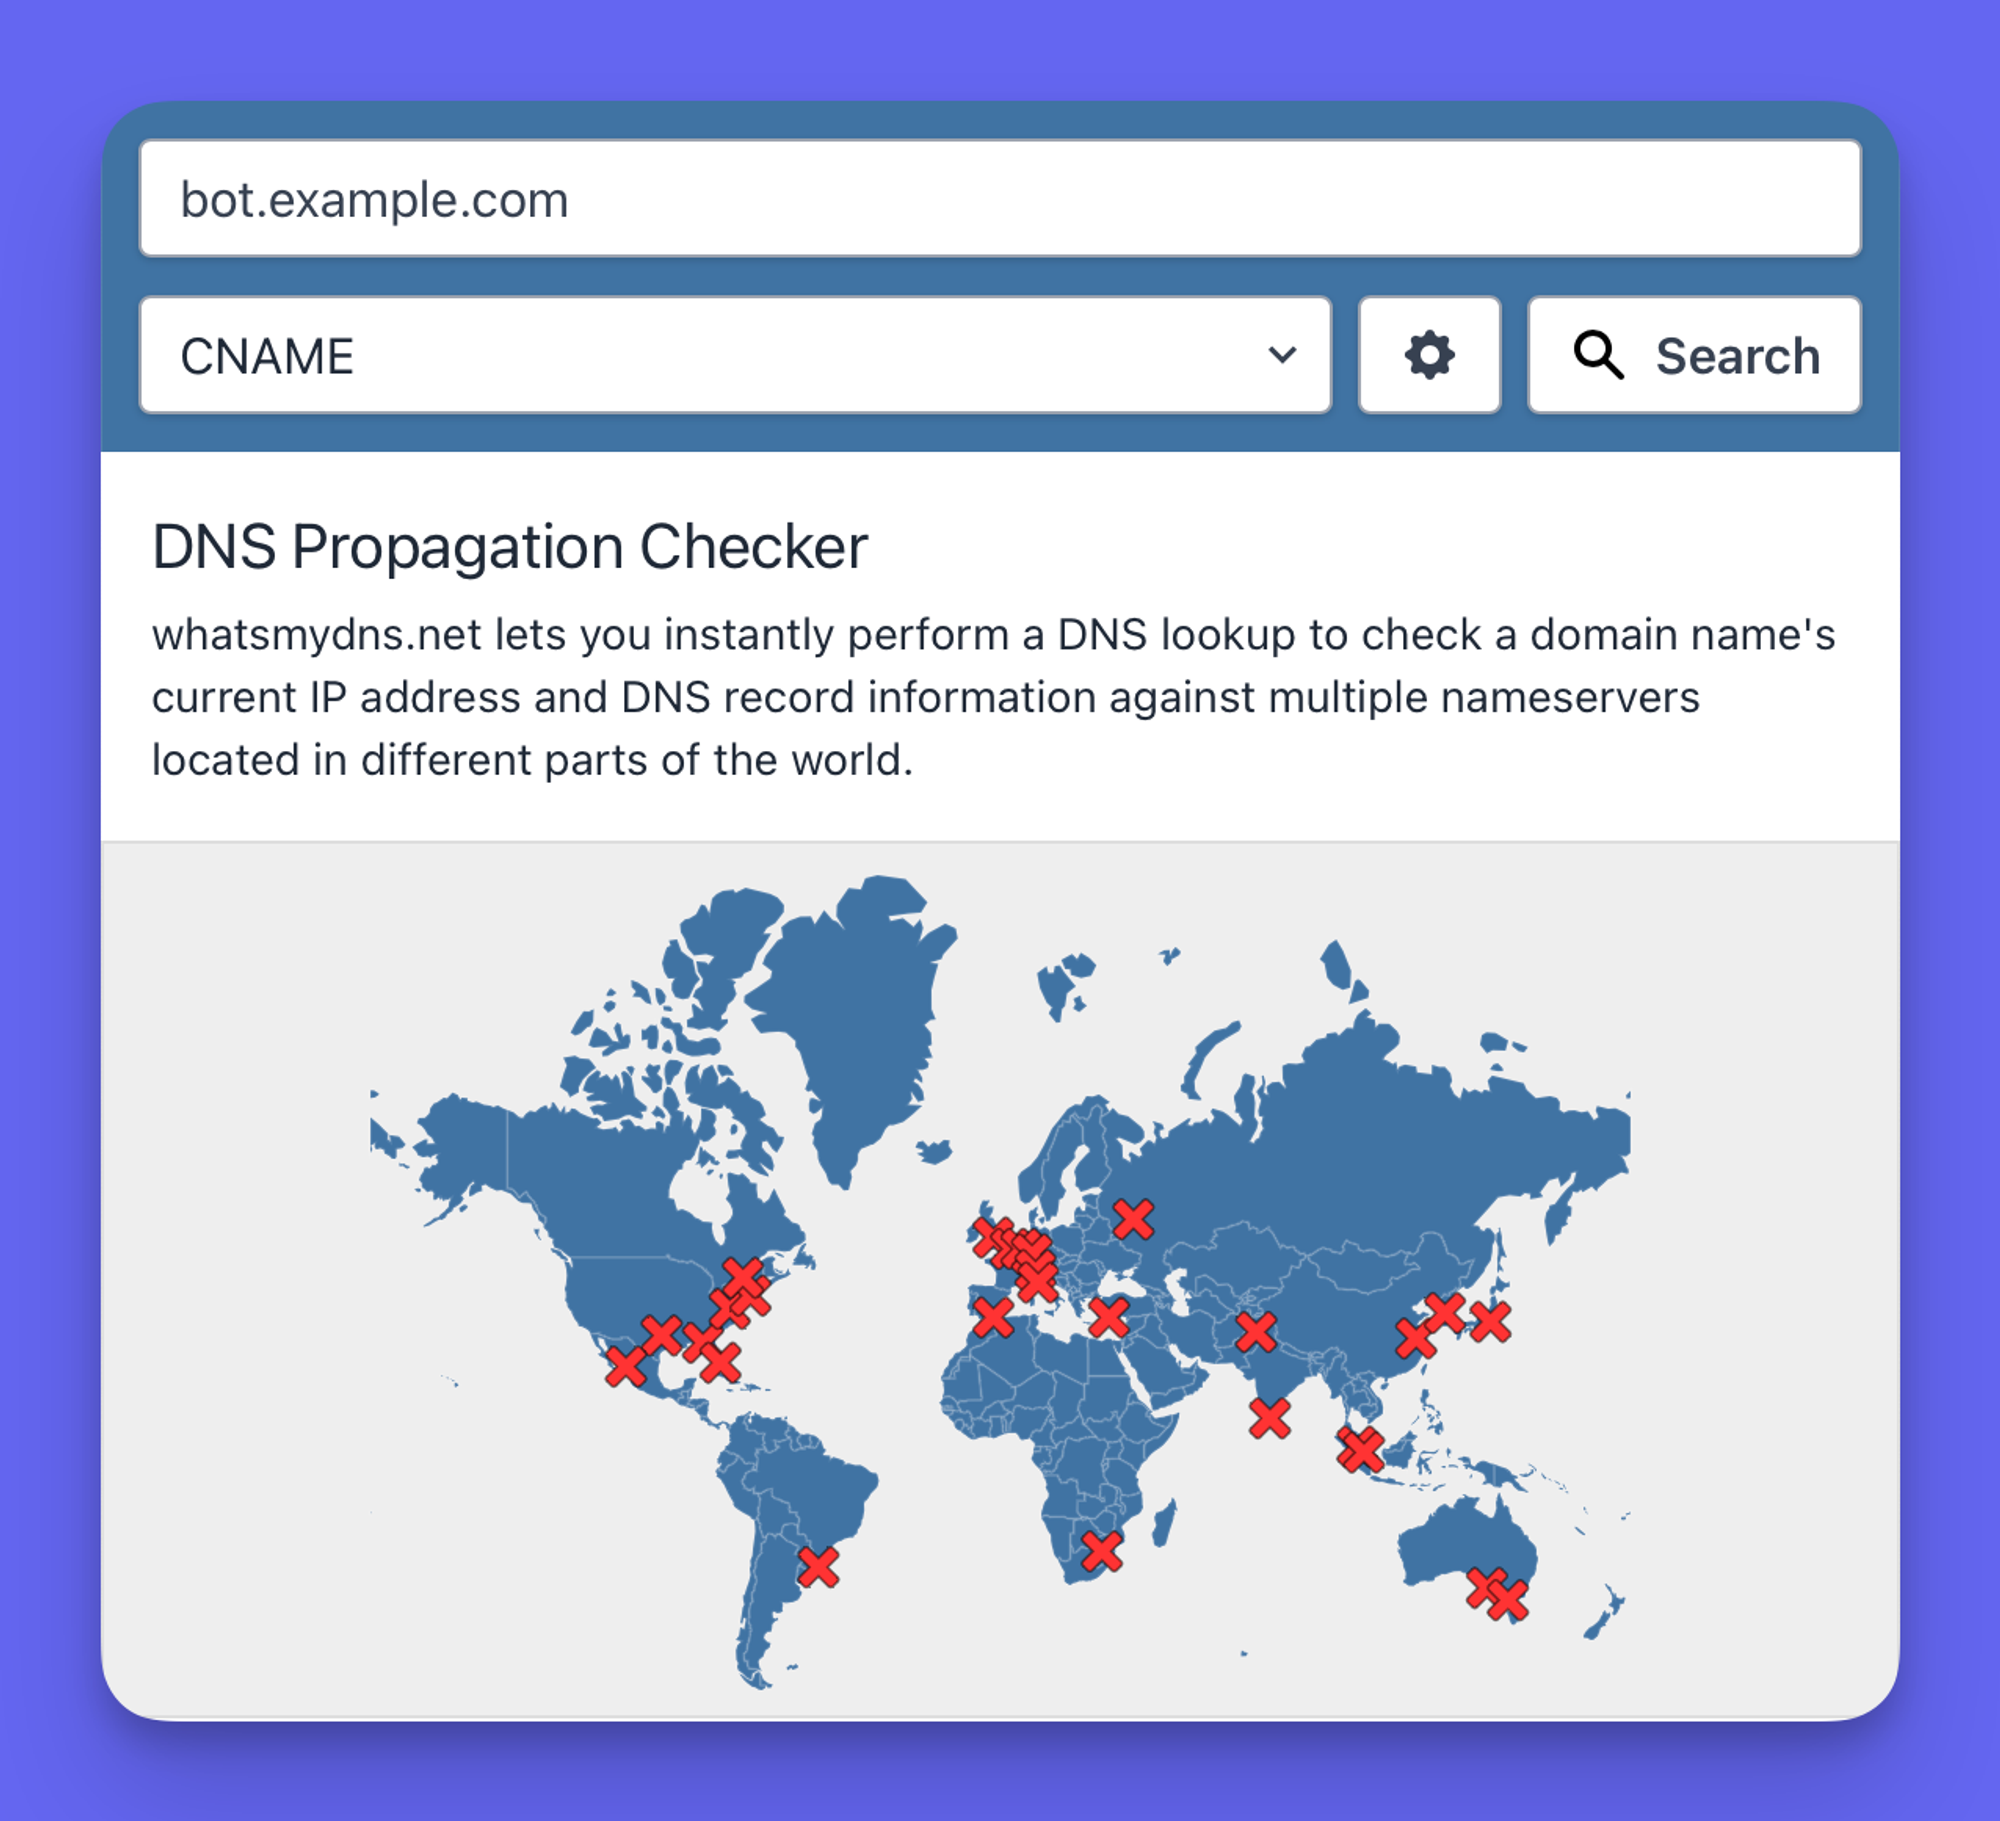 Custom Domains will be recognized by Chatwith only if they propagate correctly; the image above shows CNAME records that have not propagated yet or have not been set at all.